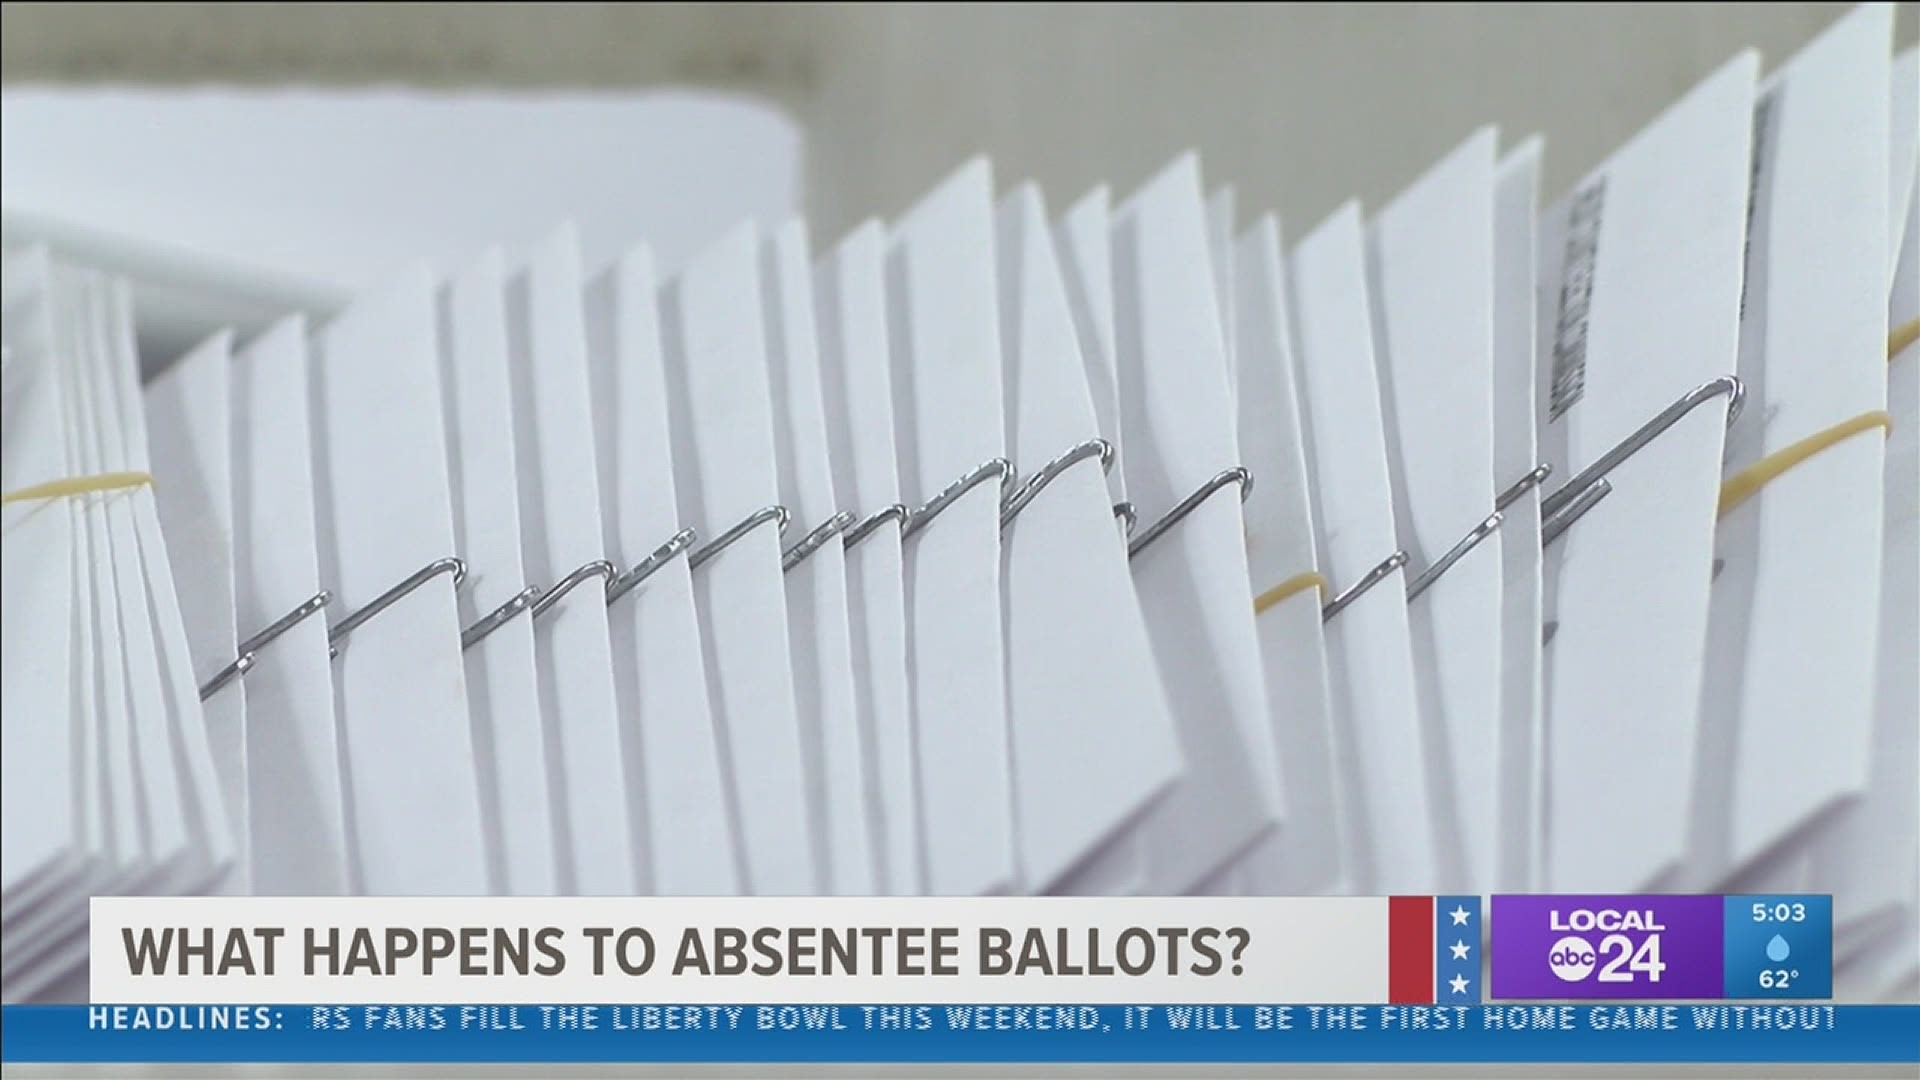 TN, MS, and AR each have different timelines on when absentee ballots can be opened, sorted, and counted